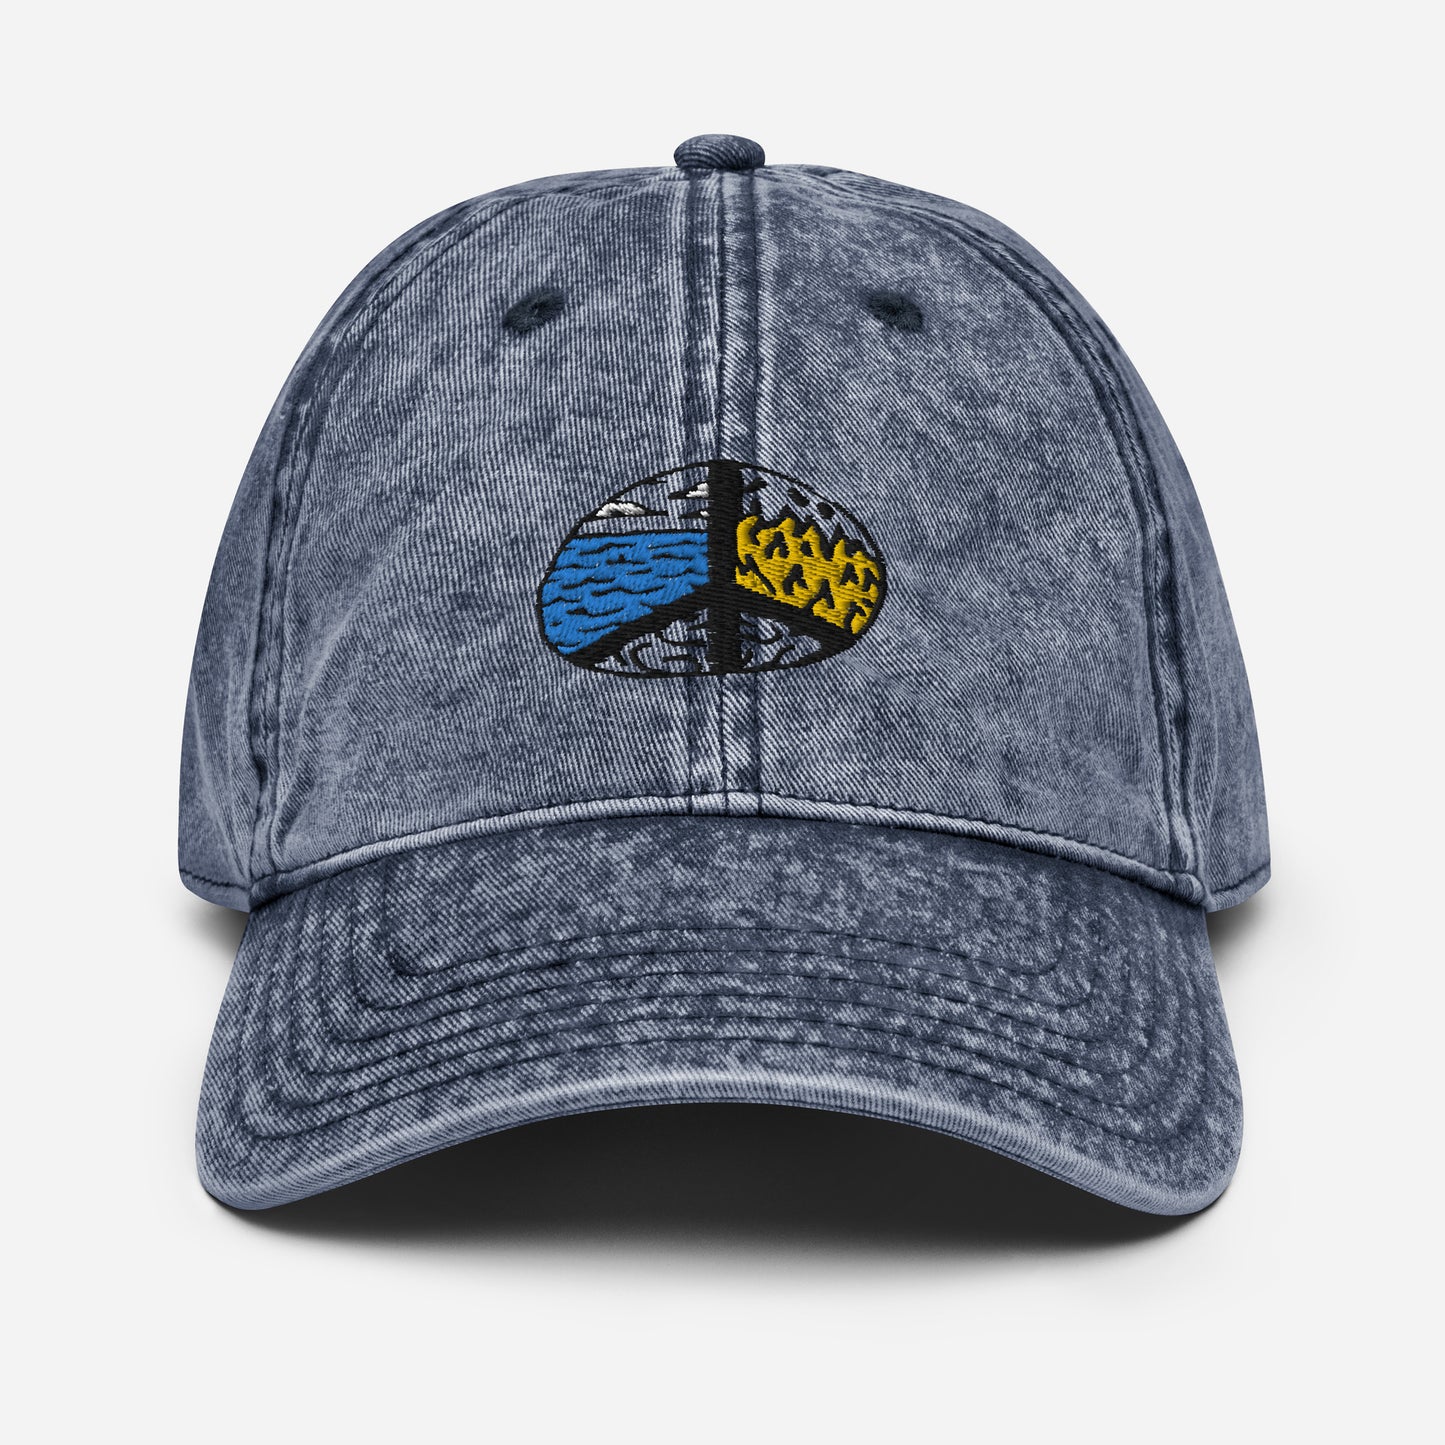 "Peaceful" Embroidered Vintage Cotton Twill Cap